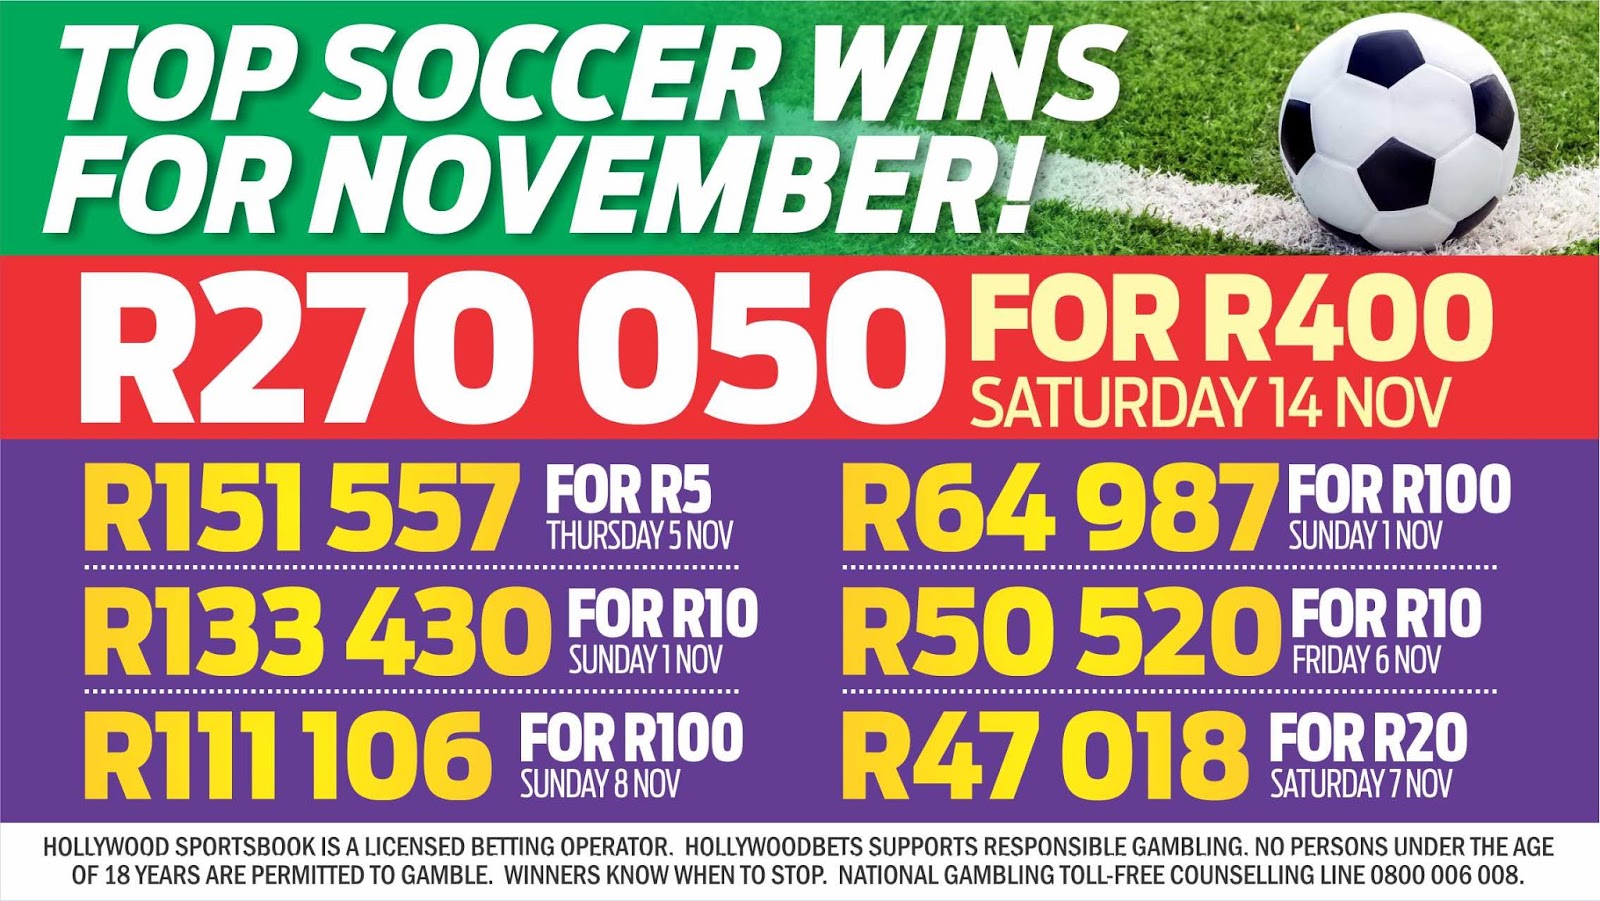 Hollywoodbets Top Soccer Wins Betting November 8